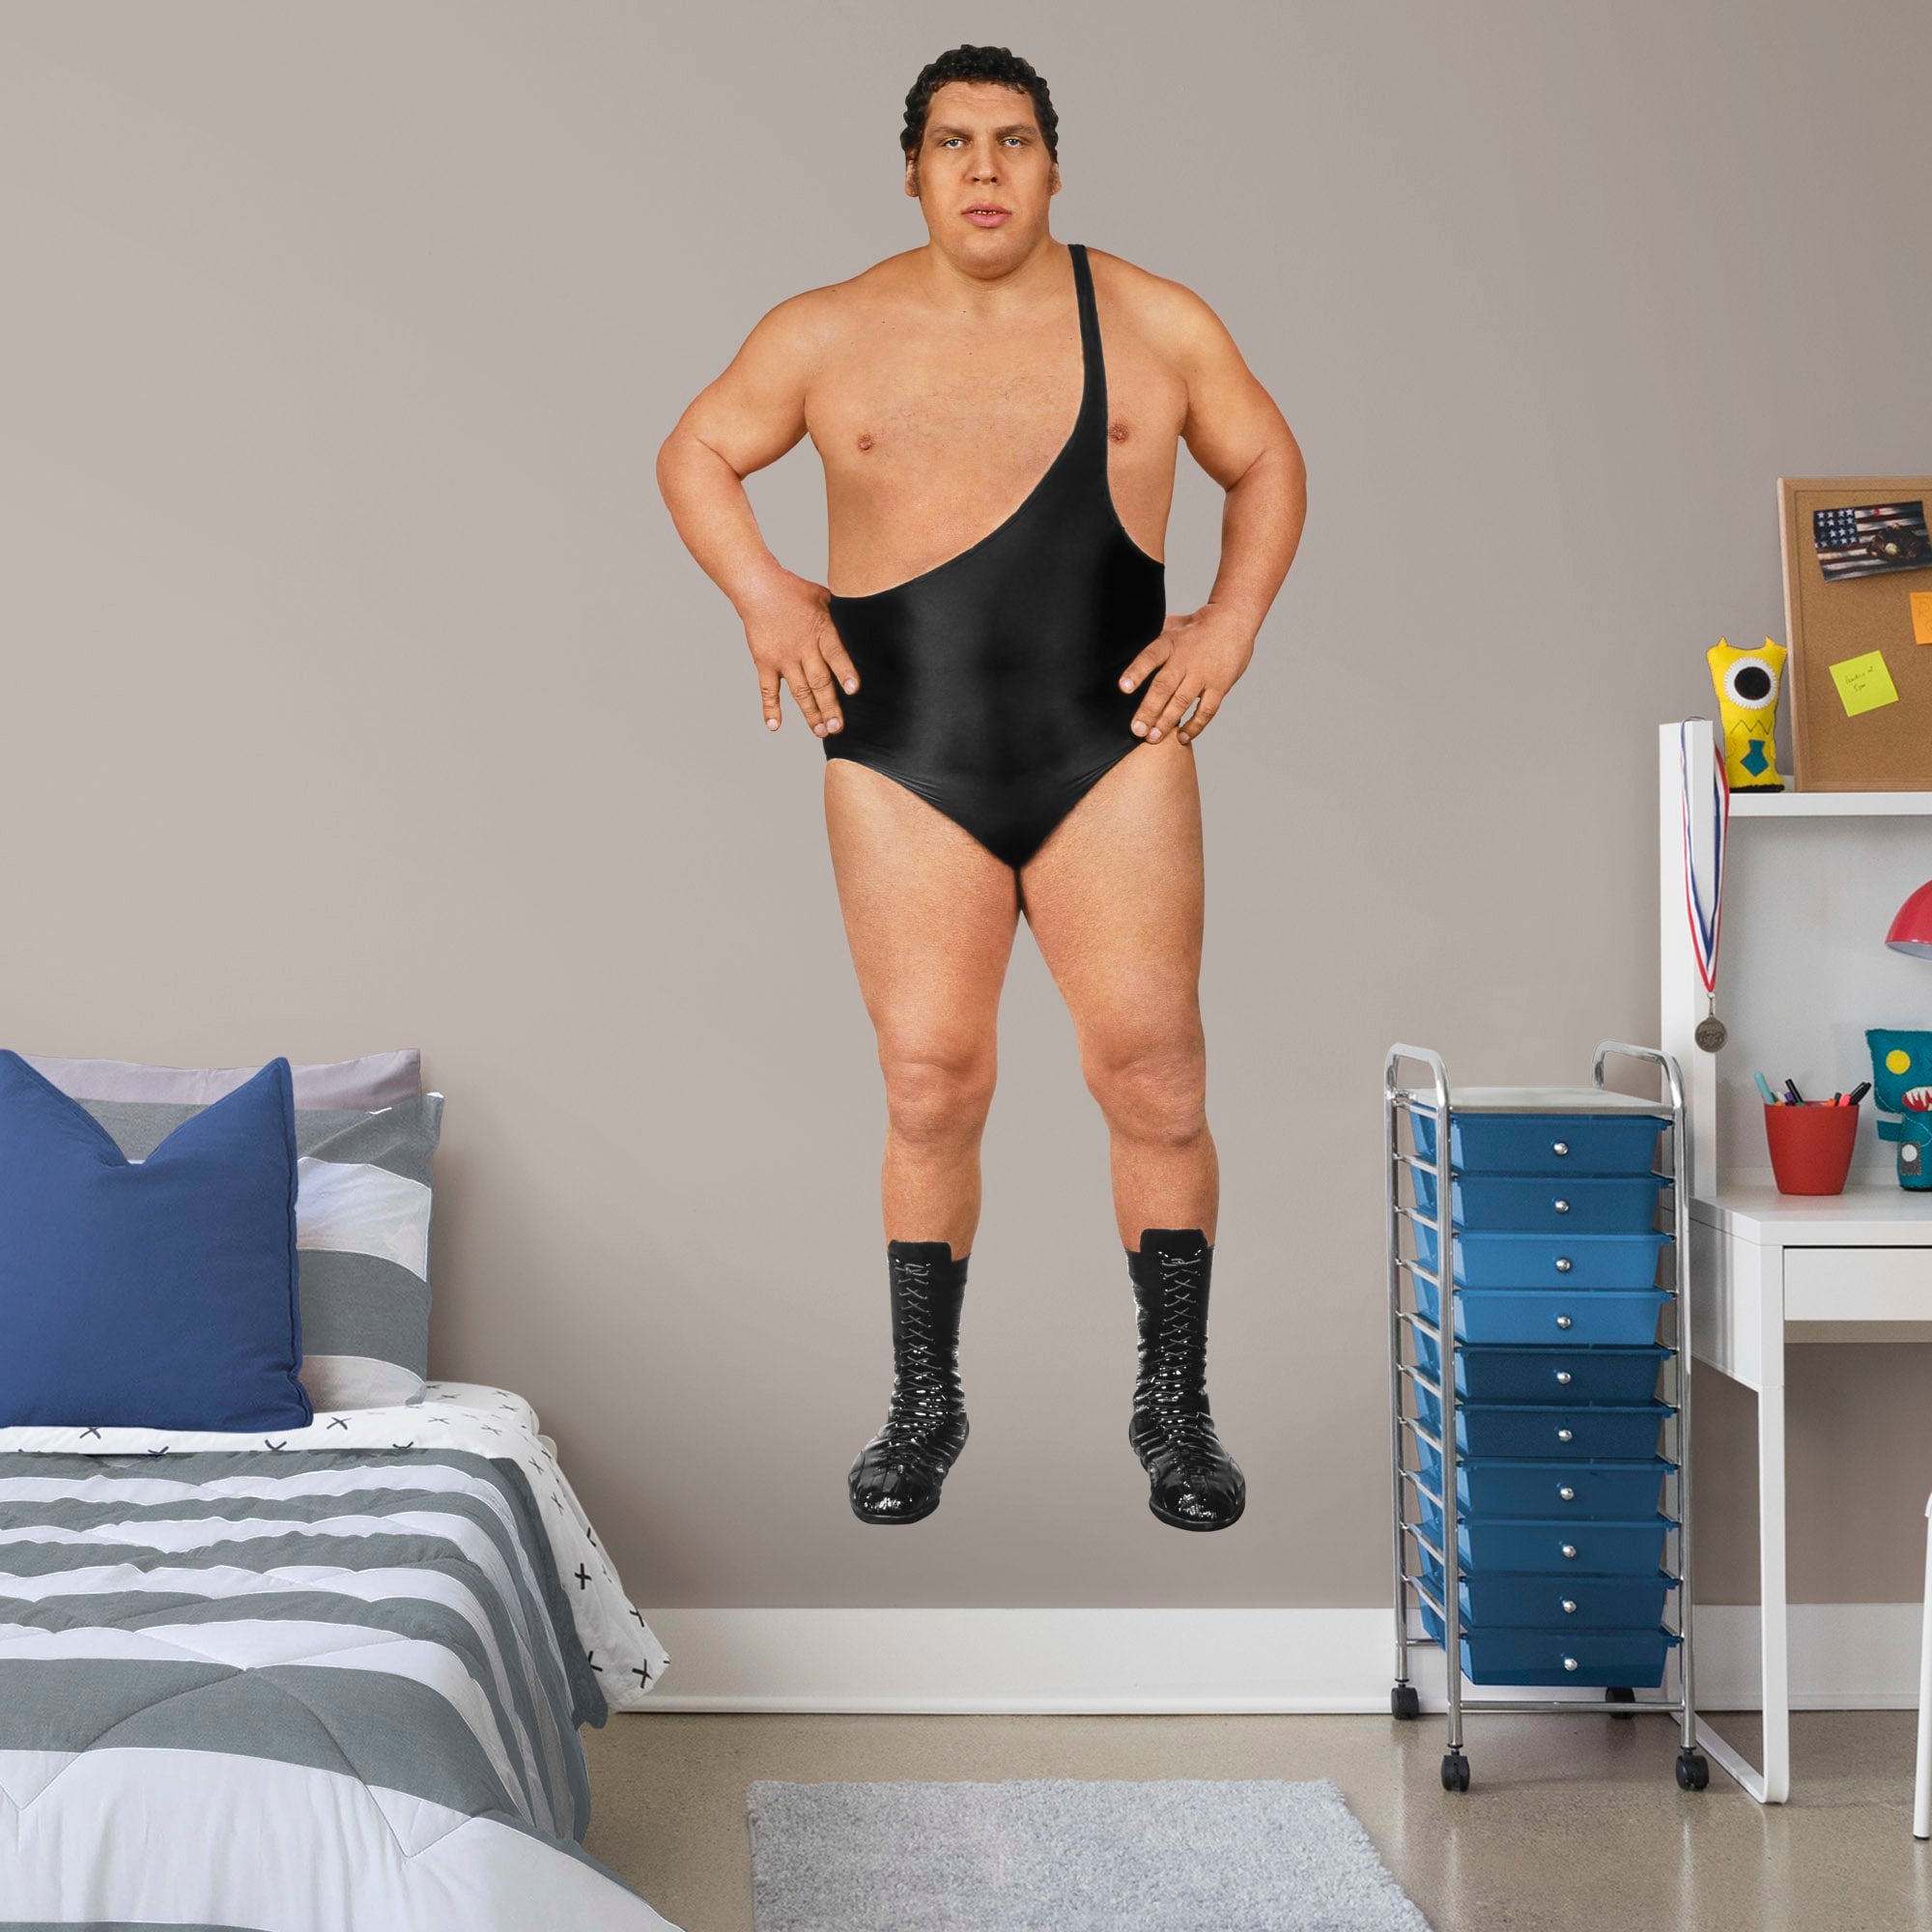 Andre The Giant for WWE - Officially Licensed Removable Wall Decal Life-Size Superstar + 2 Decals (40"W x 91"H) by Fathead | Vin